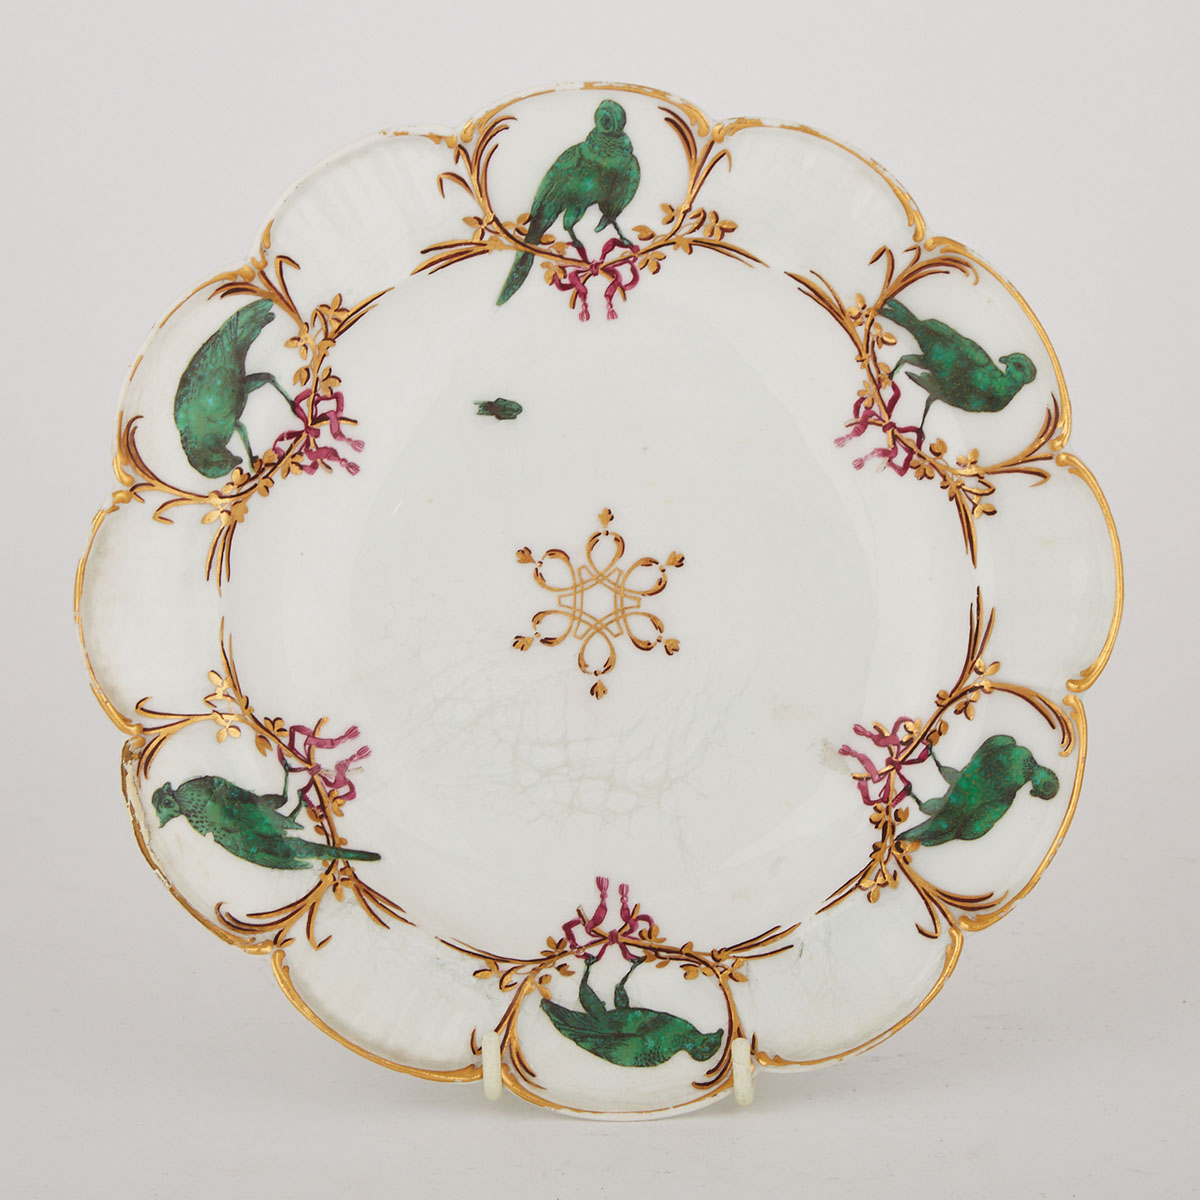 Chelsea Birds in Compartments Scalloped Plate, c.1760-65